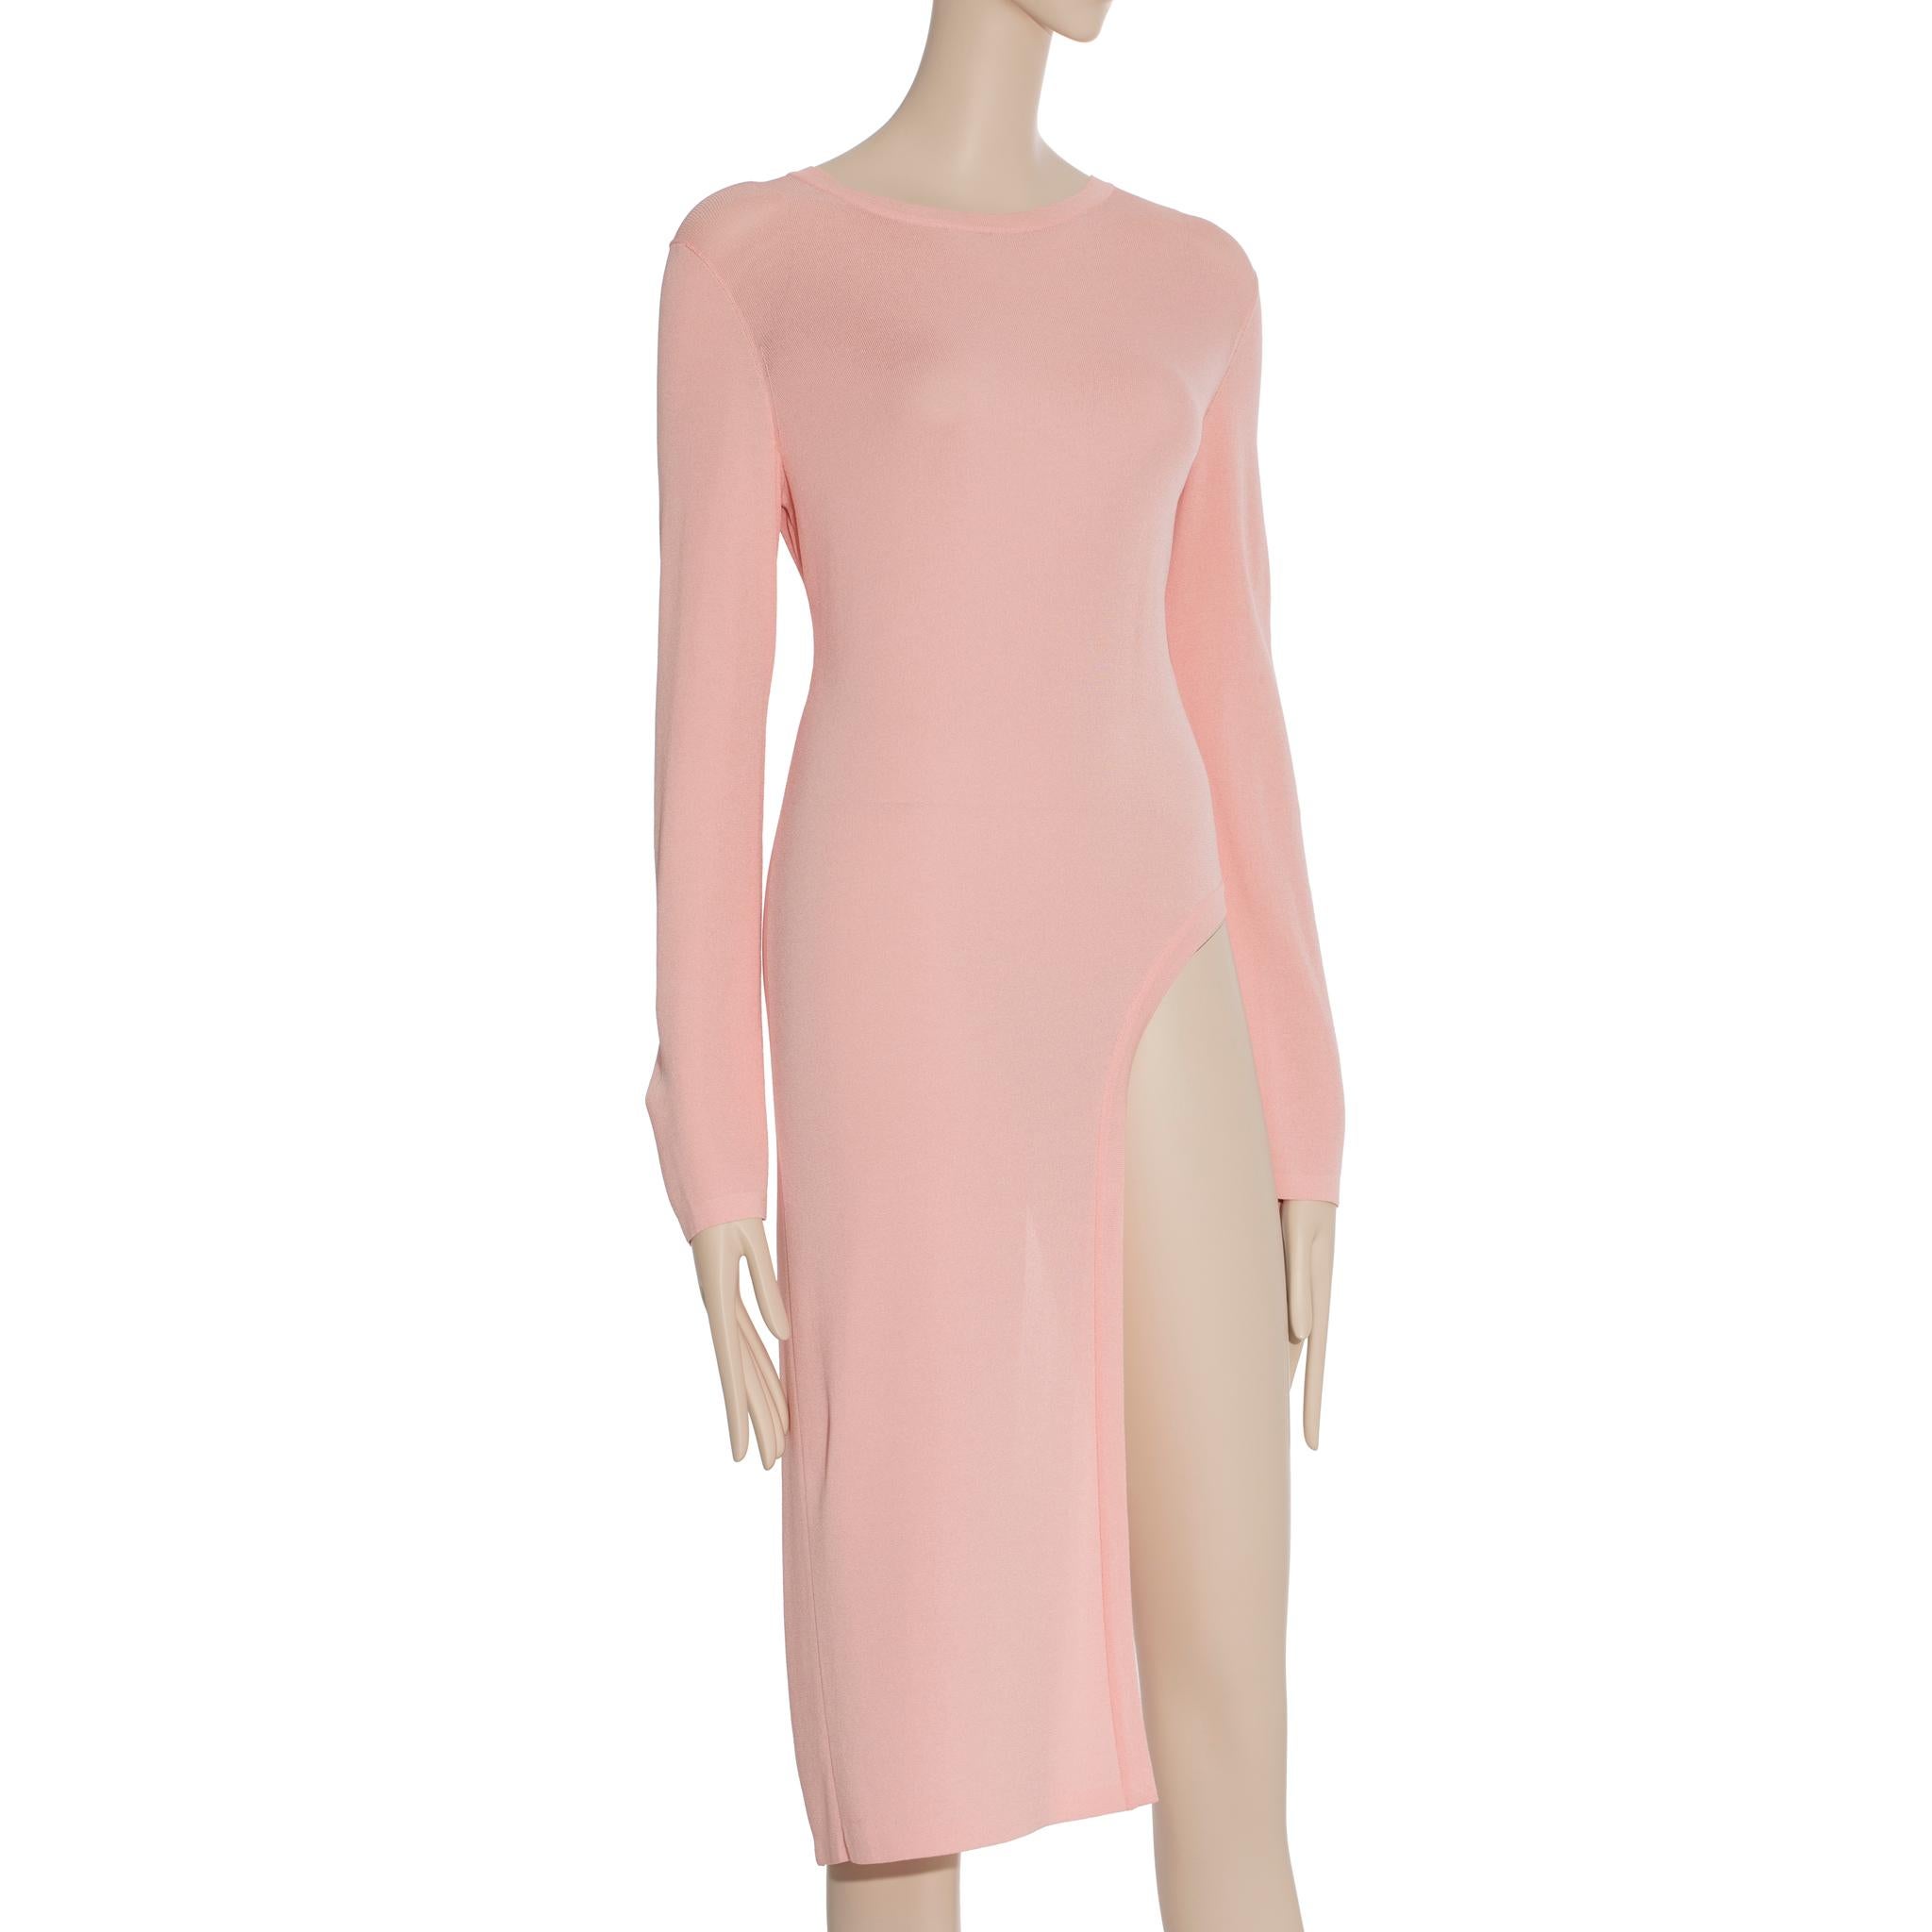 Chanel Knit Pink Long Sleeve Dress/Top 40 FR In New Condition For Sale In DOUBLE BAY, NSW